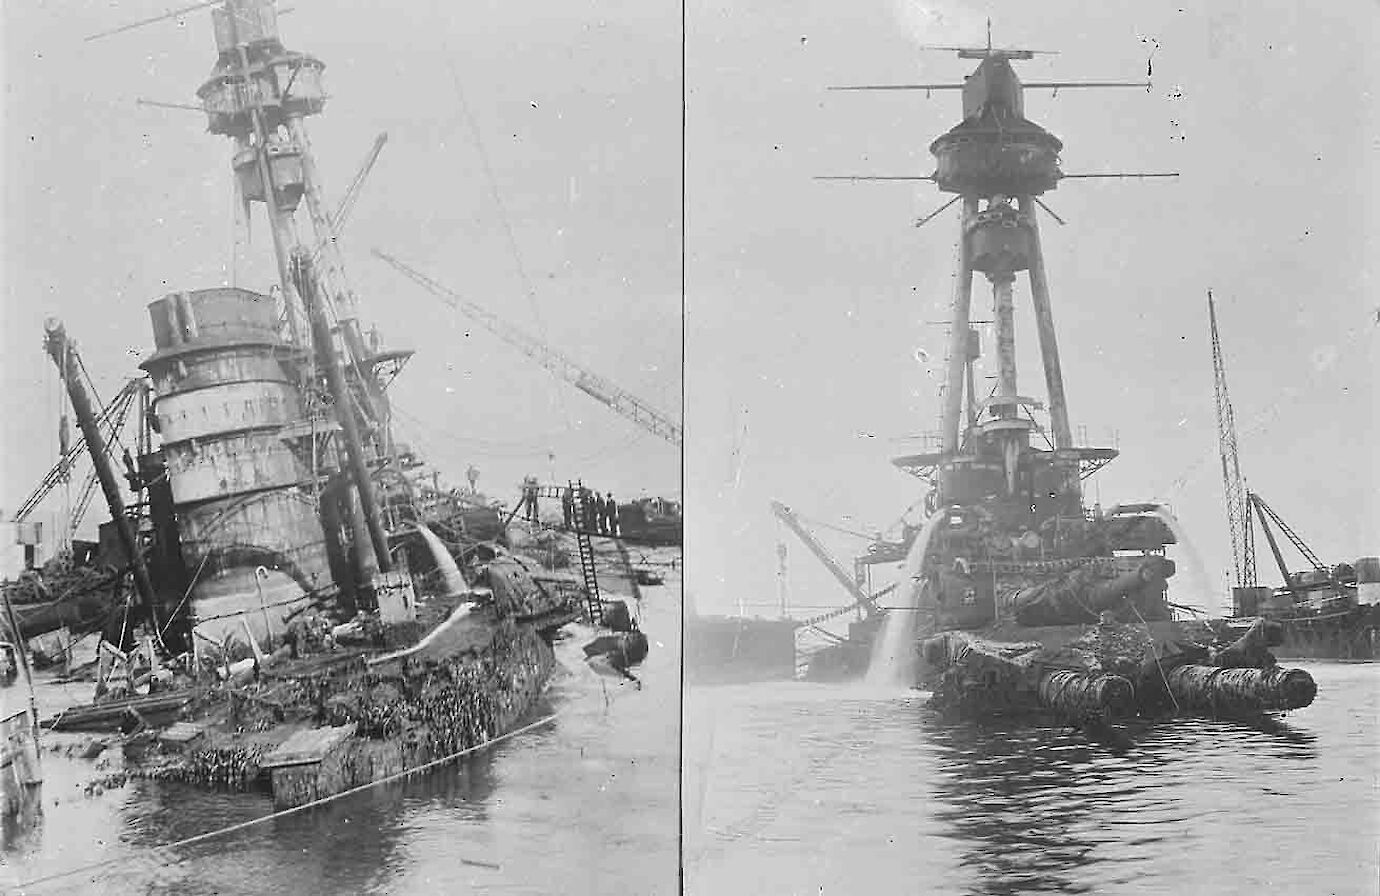 Salvage operations underway - image courtesy Orkney Library & Archive